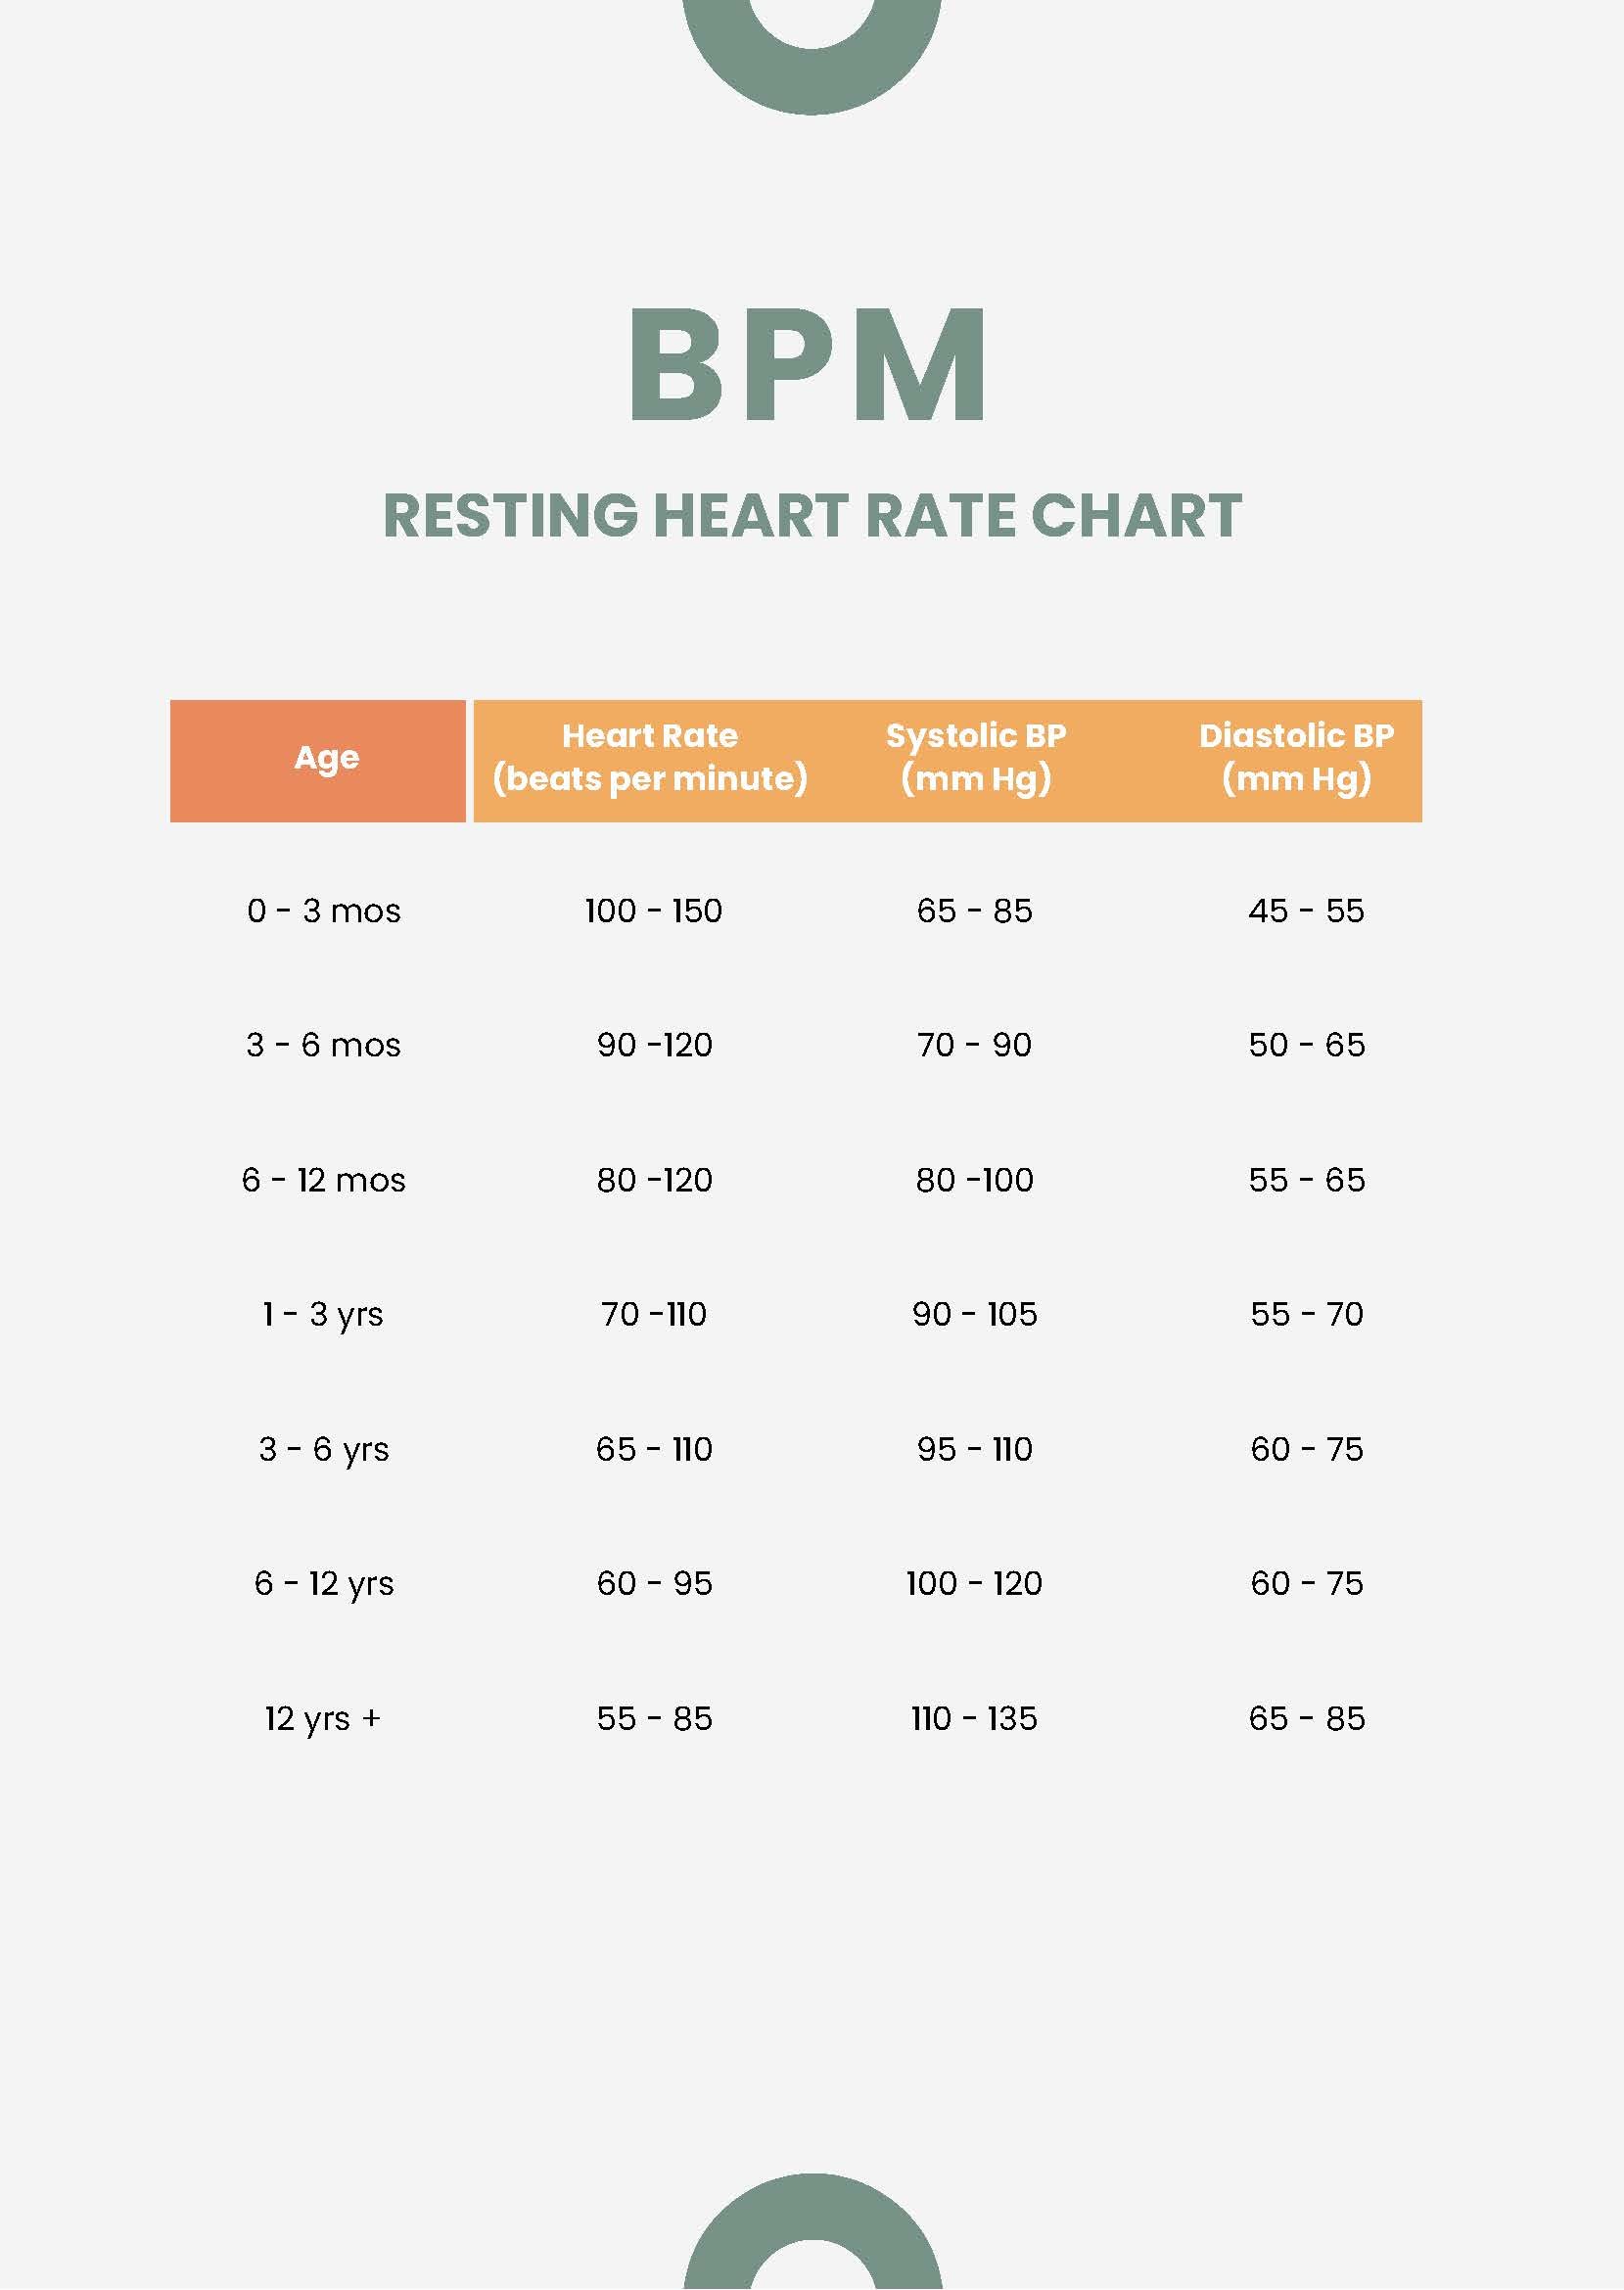 BPM Resting Heart Rate Chart in PDF